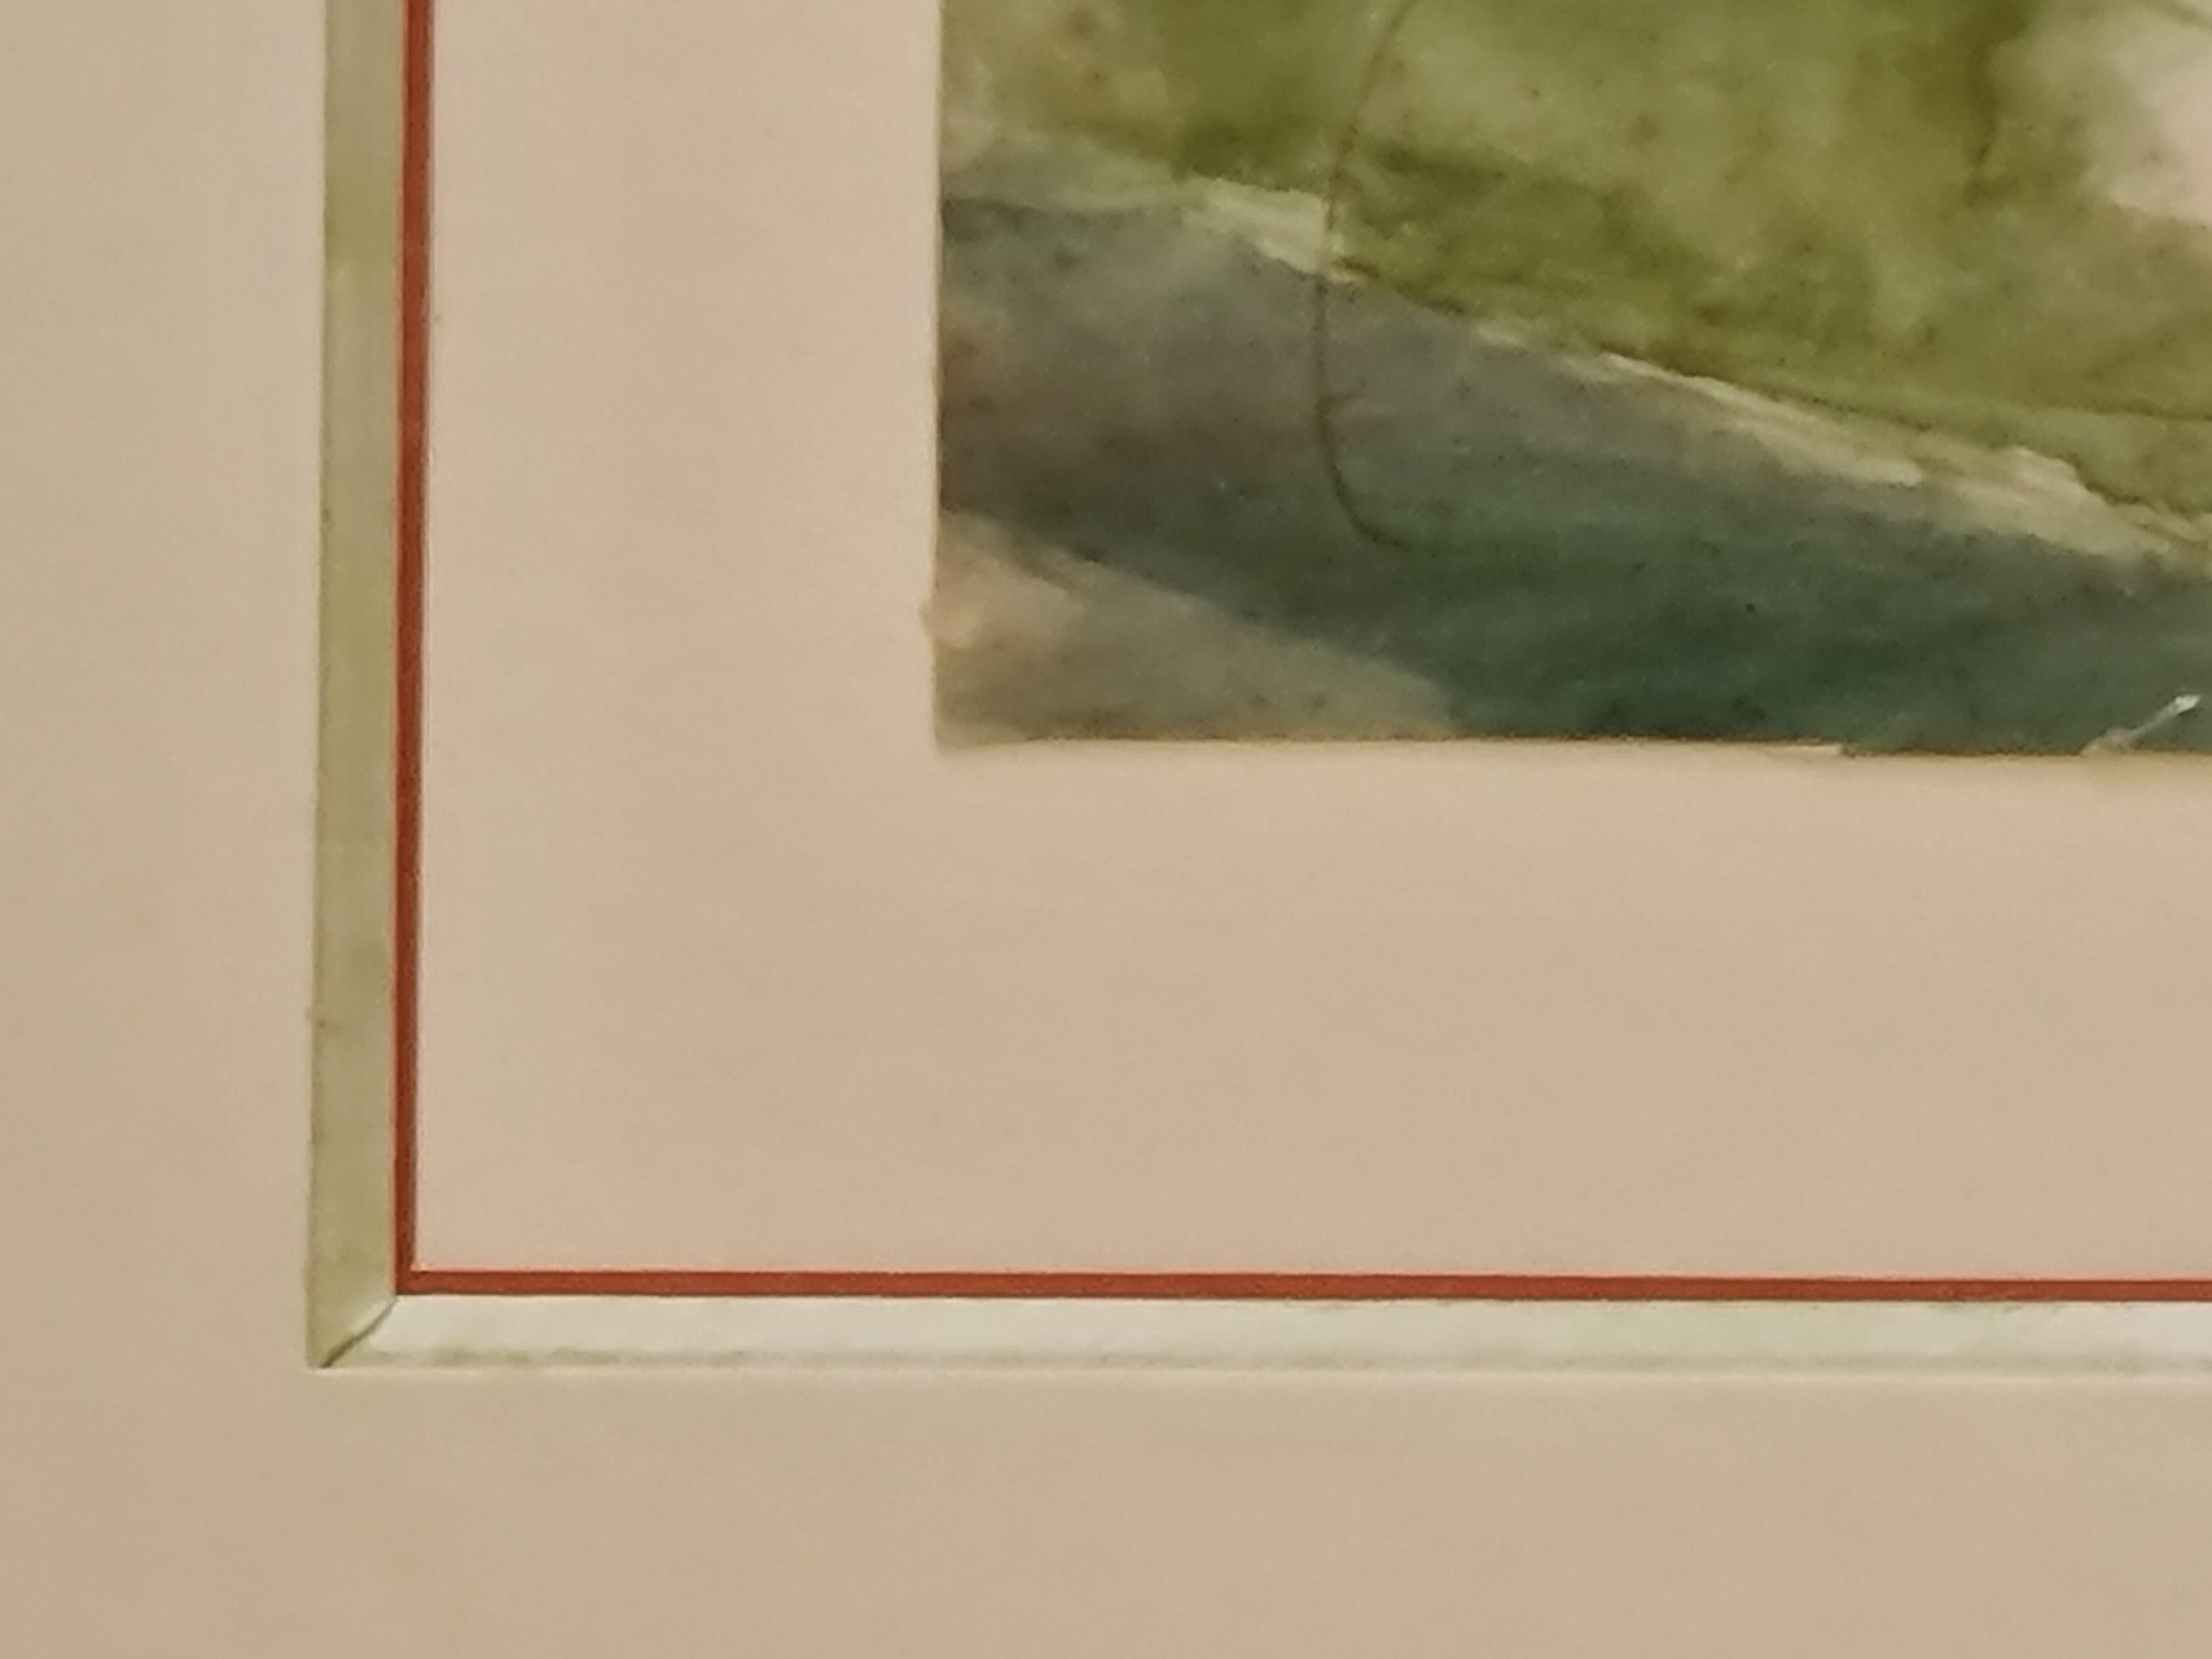 French mid 20th Century watercolour landscape on paper by Roger Tolmer. Signed bottom right. Presented under glass in fine custom giltwood frame with a hand count mount and passe-partout.

Tolmer has used a russet red to highlight details and forms